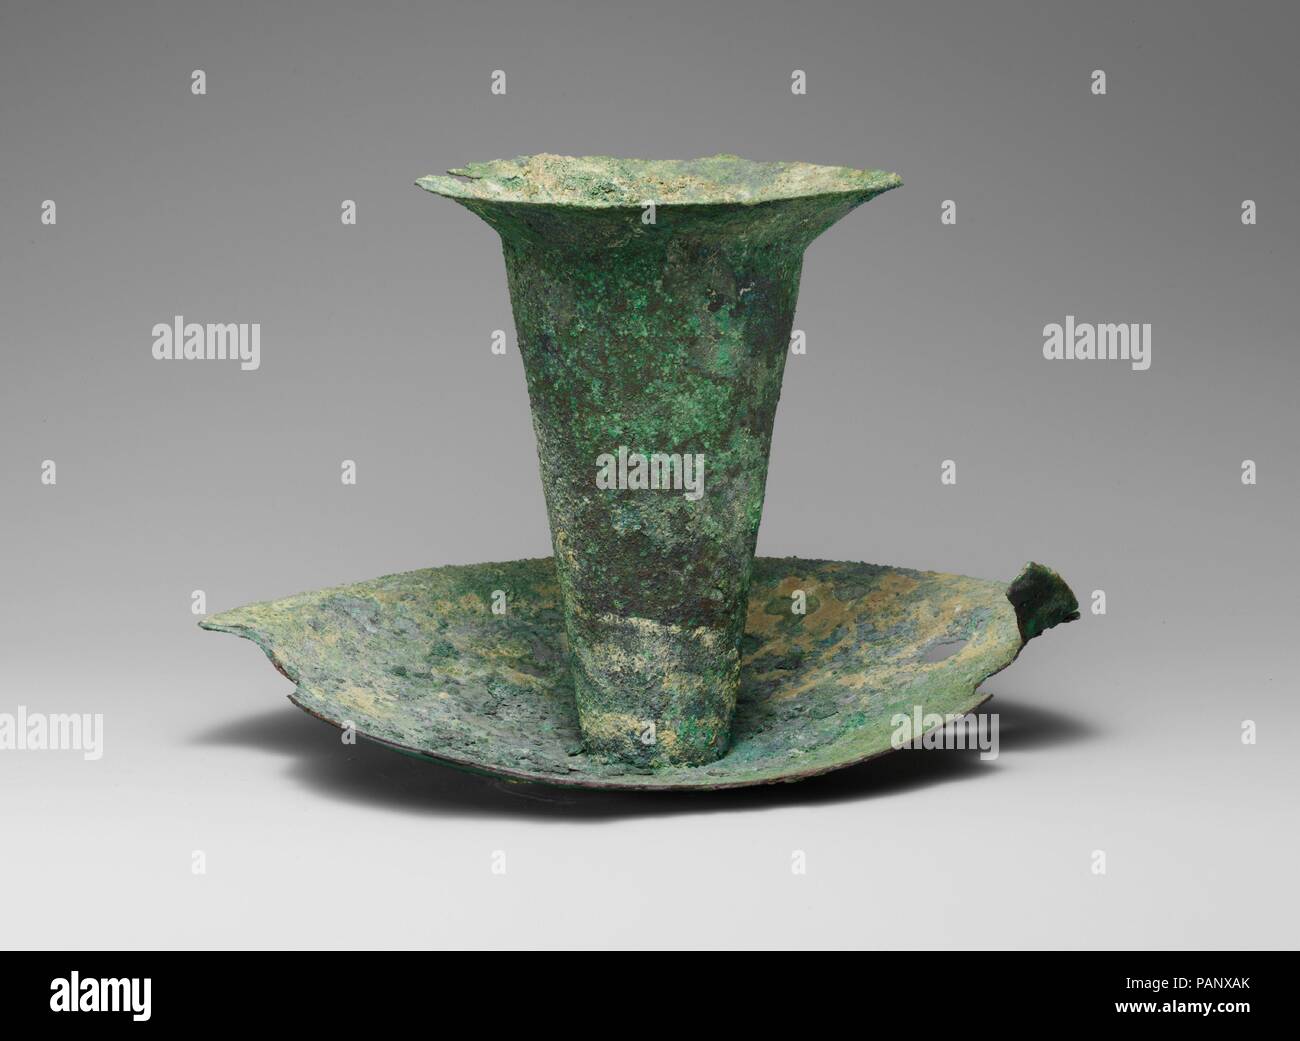 Bronze thymiaterion (incense burner). Culture: Cypriot. Dimensions: 6in. (15.2cm)  Other (diameter of mouth): 4 3/4in. (12.1cm)  Other (diameter of saucer): 8 5/8in. (21.9cm). Date: 6th century B.C..  This example represents the typical Cypriot form of incense burner, attested in terracotta as well as bronze. The shape was known in Cyprus during the Late Bronze Age and was evidently reintroduced during the Archaic period by the Phoenicians. Museum: Metropolitan Museum of Art, New York, USA. Stock Photo